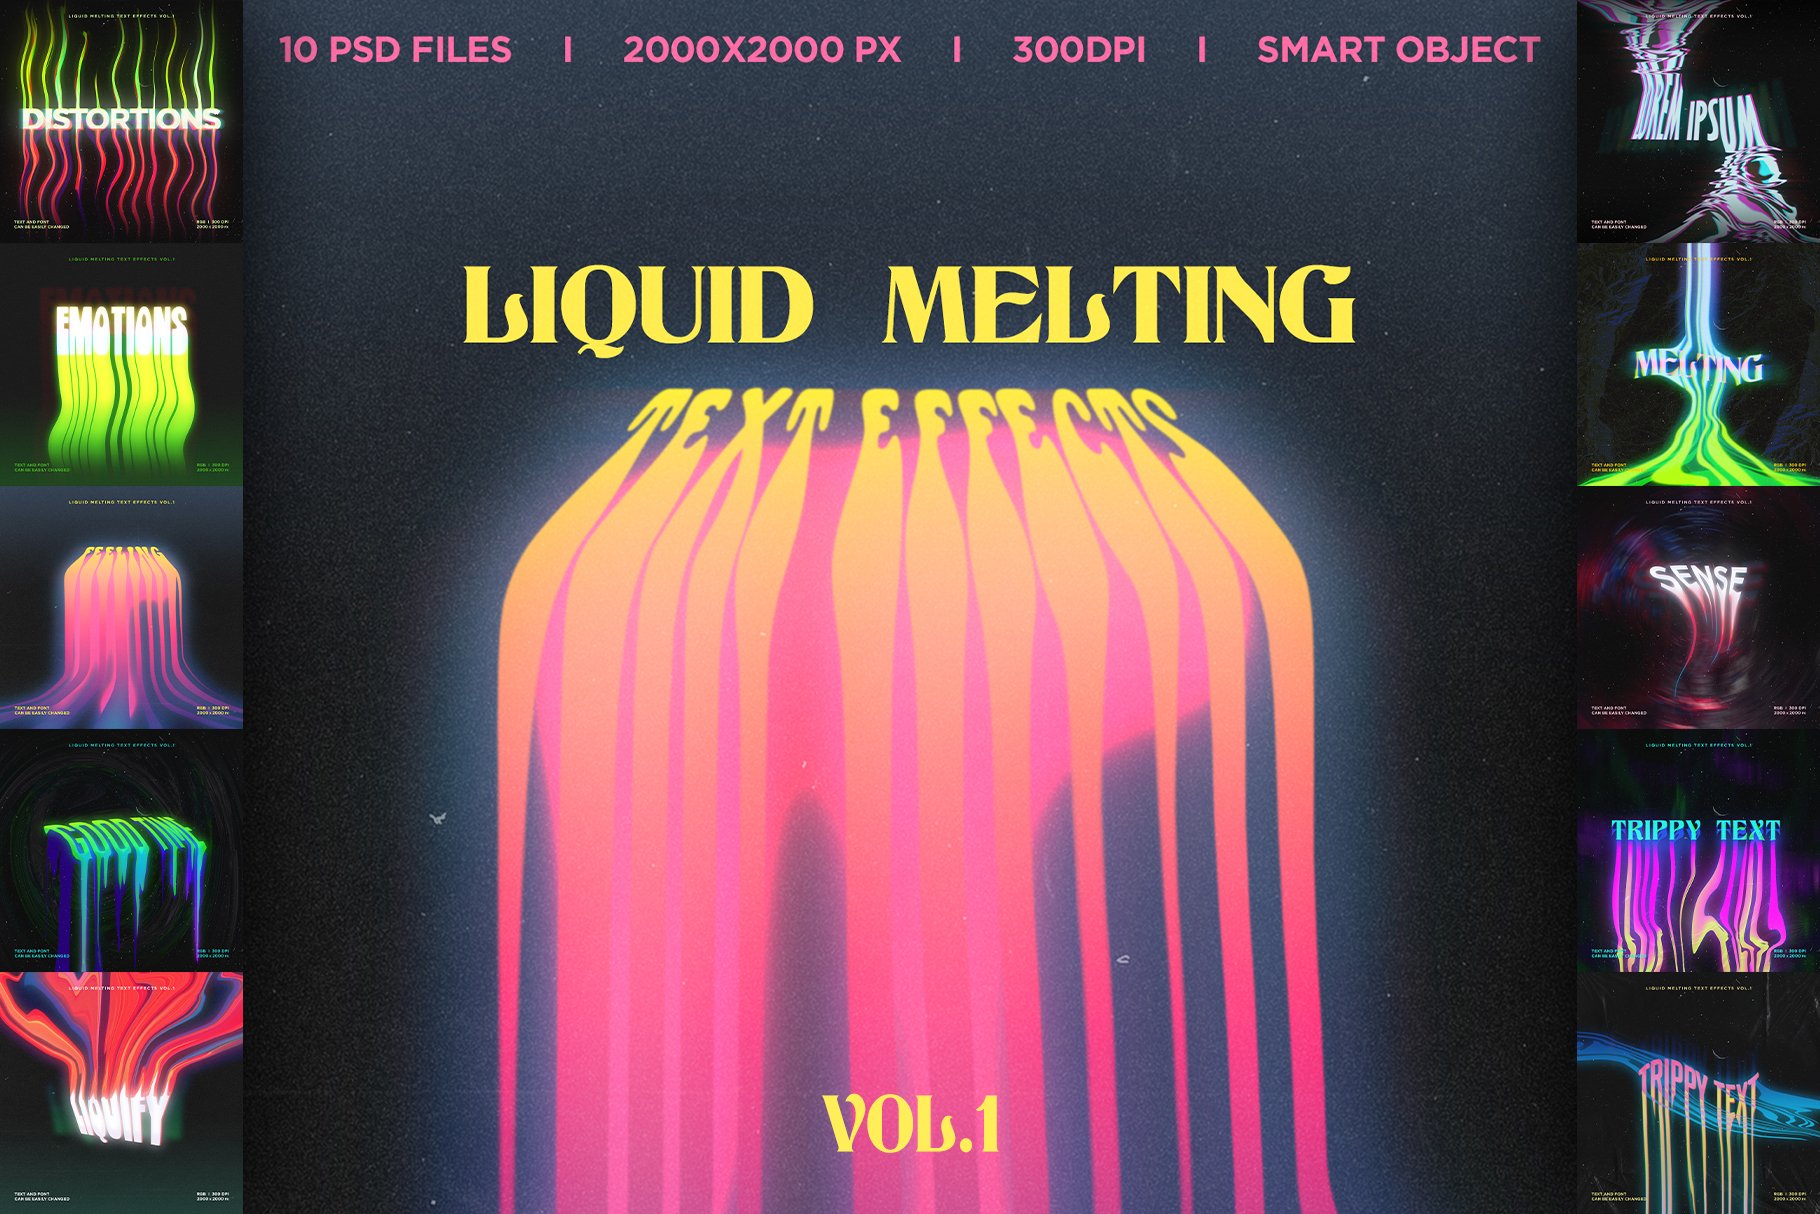 Liquid Melting Text Effects Vol.1cover image.